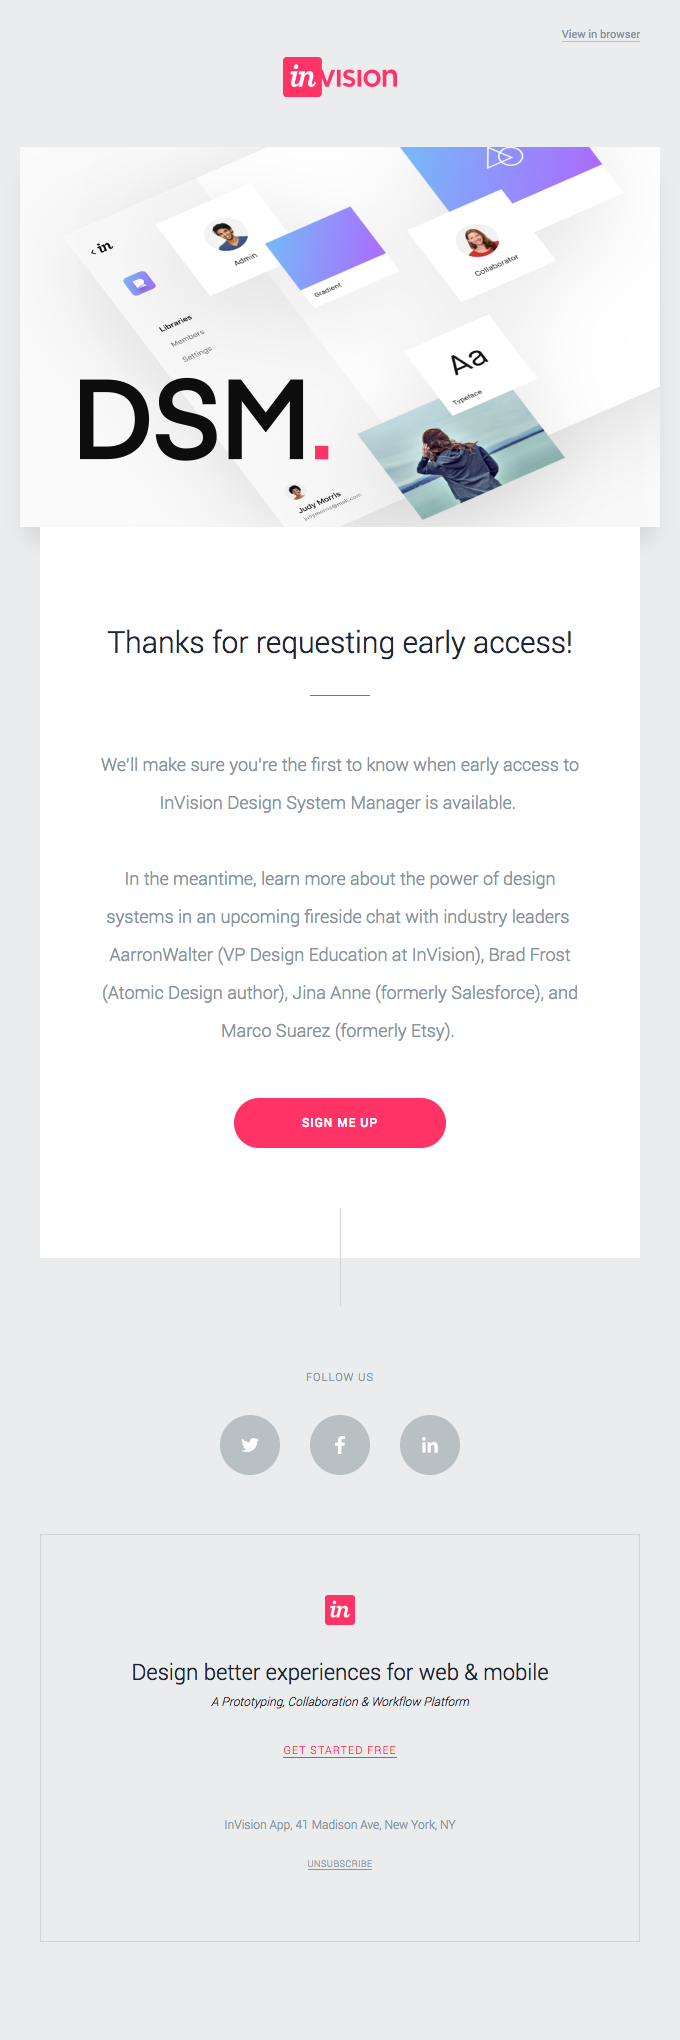 You’re first in line for InVision’s Design System Manager